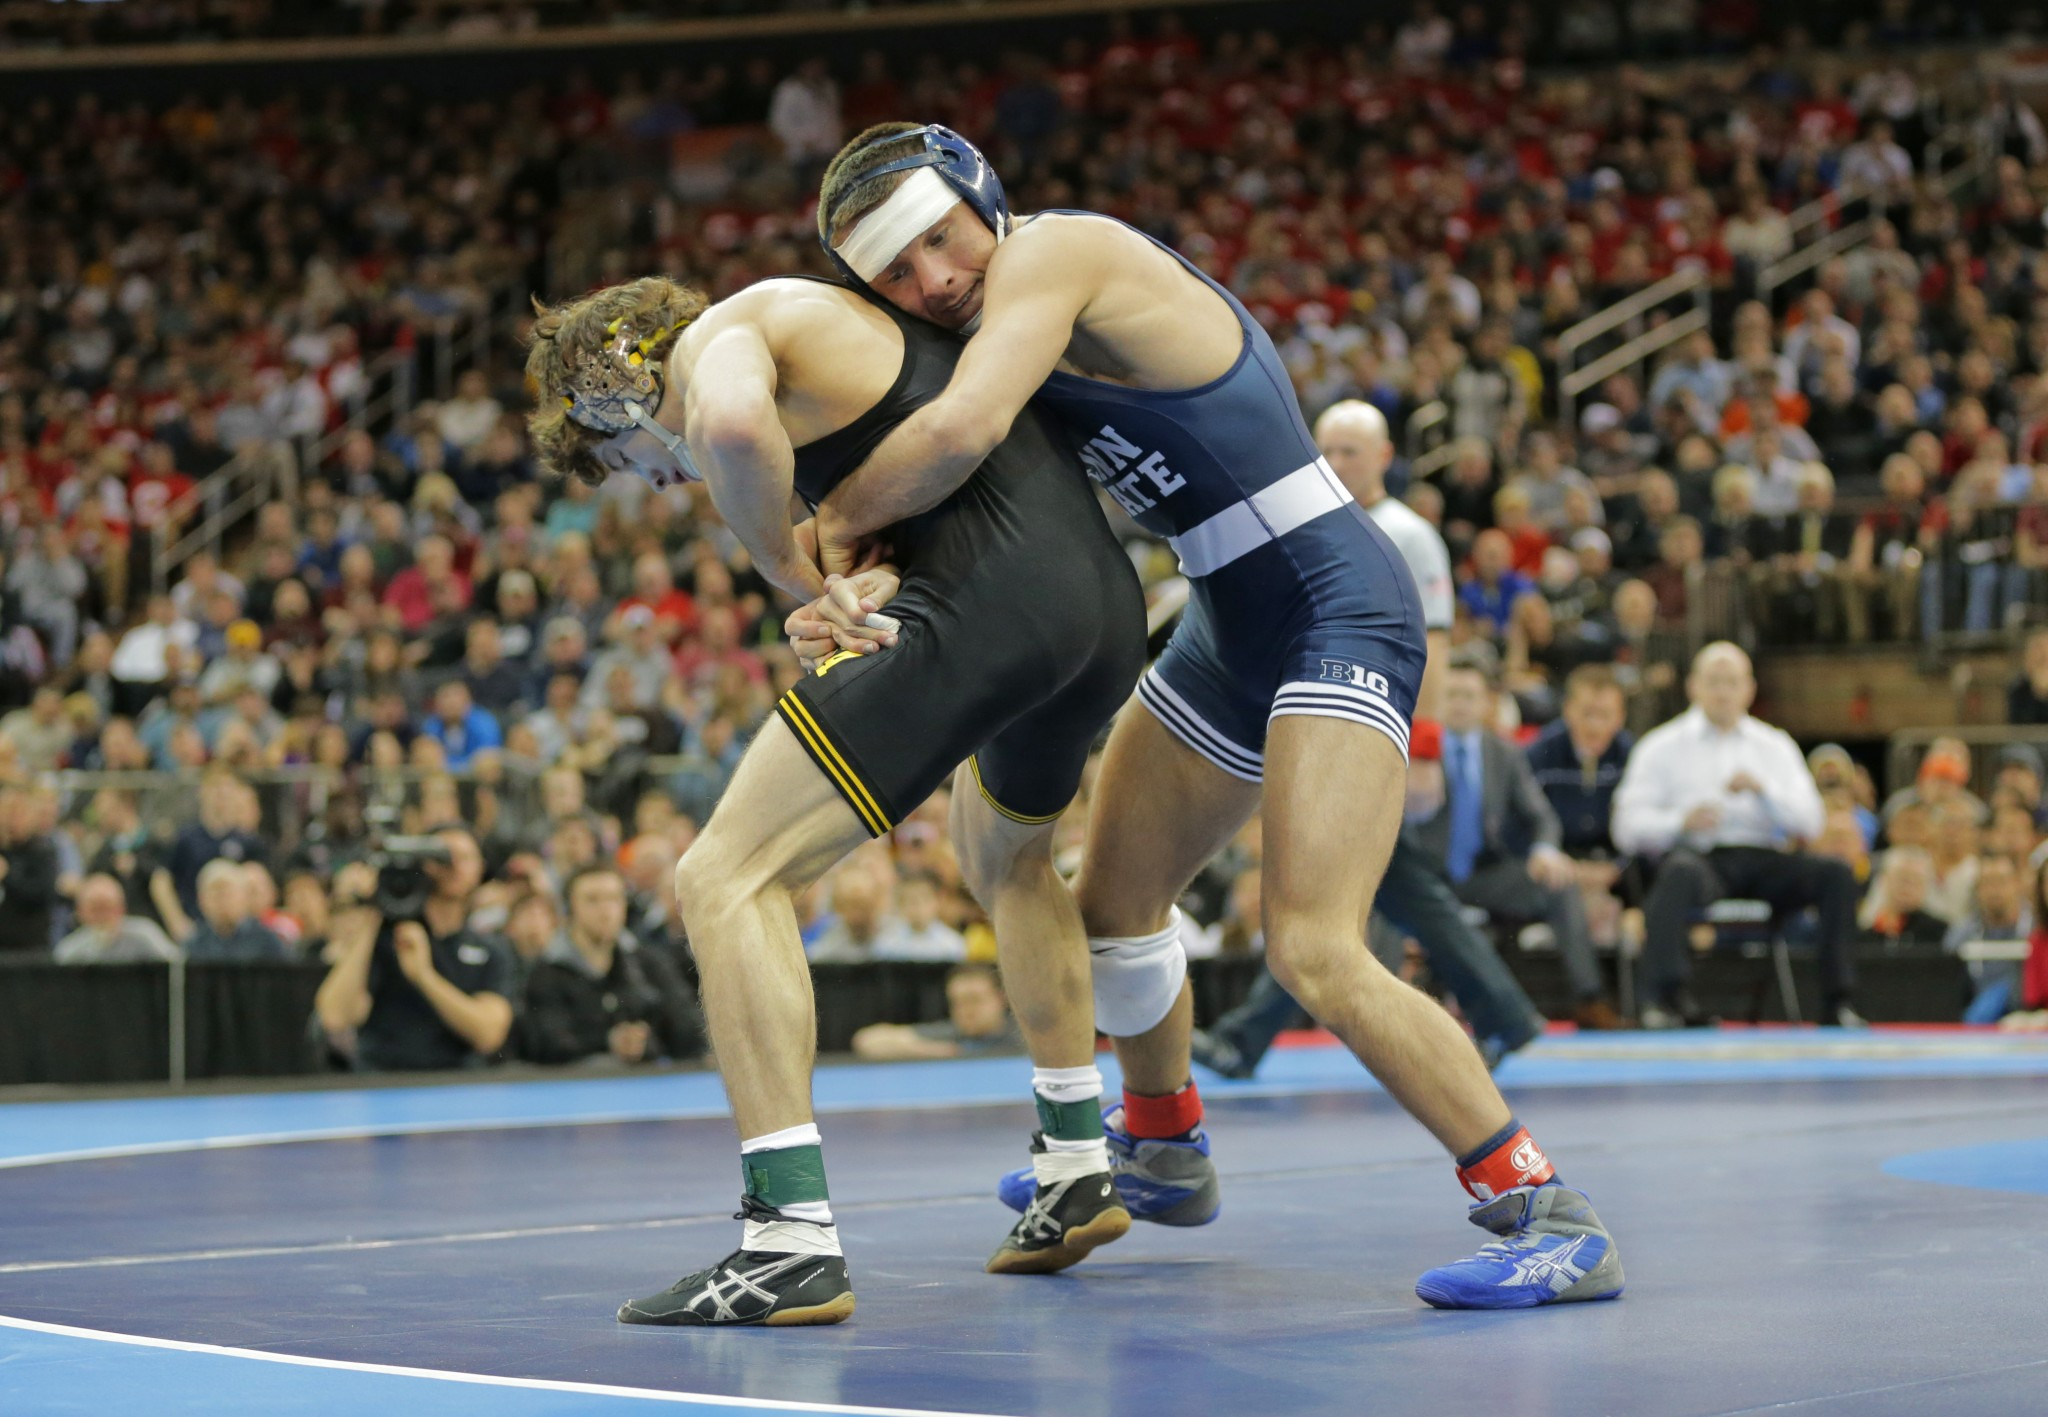 The NCAA currently have a men's wrestling division ©Getty Images